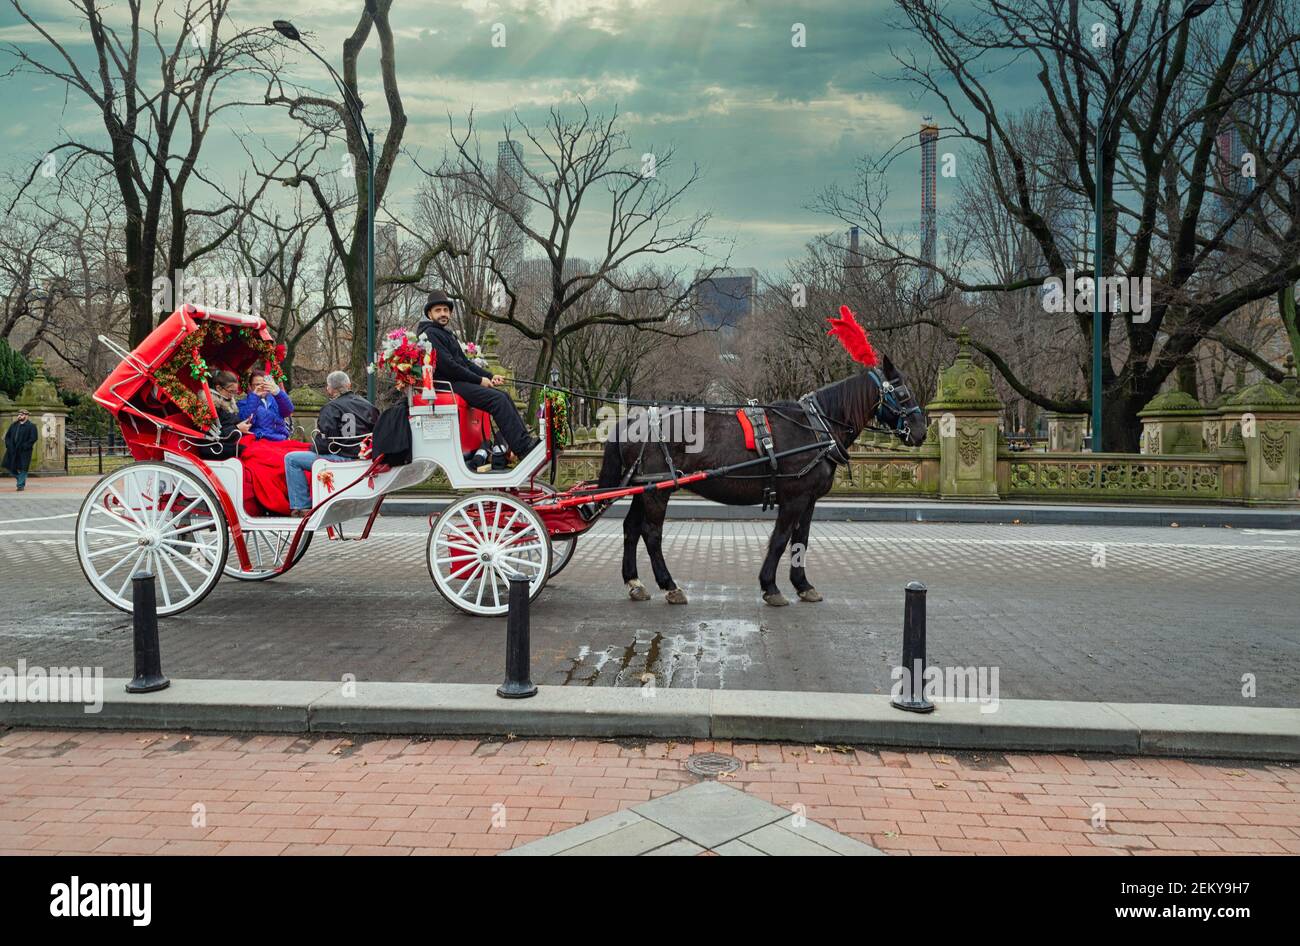 A horse and buggy carriage with coachman in Central Park New York city with visitors, Sunset view with skyline and clouds in the sky in background Stock Photo